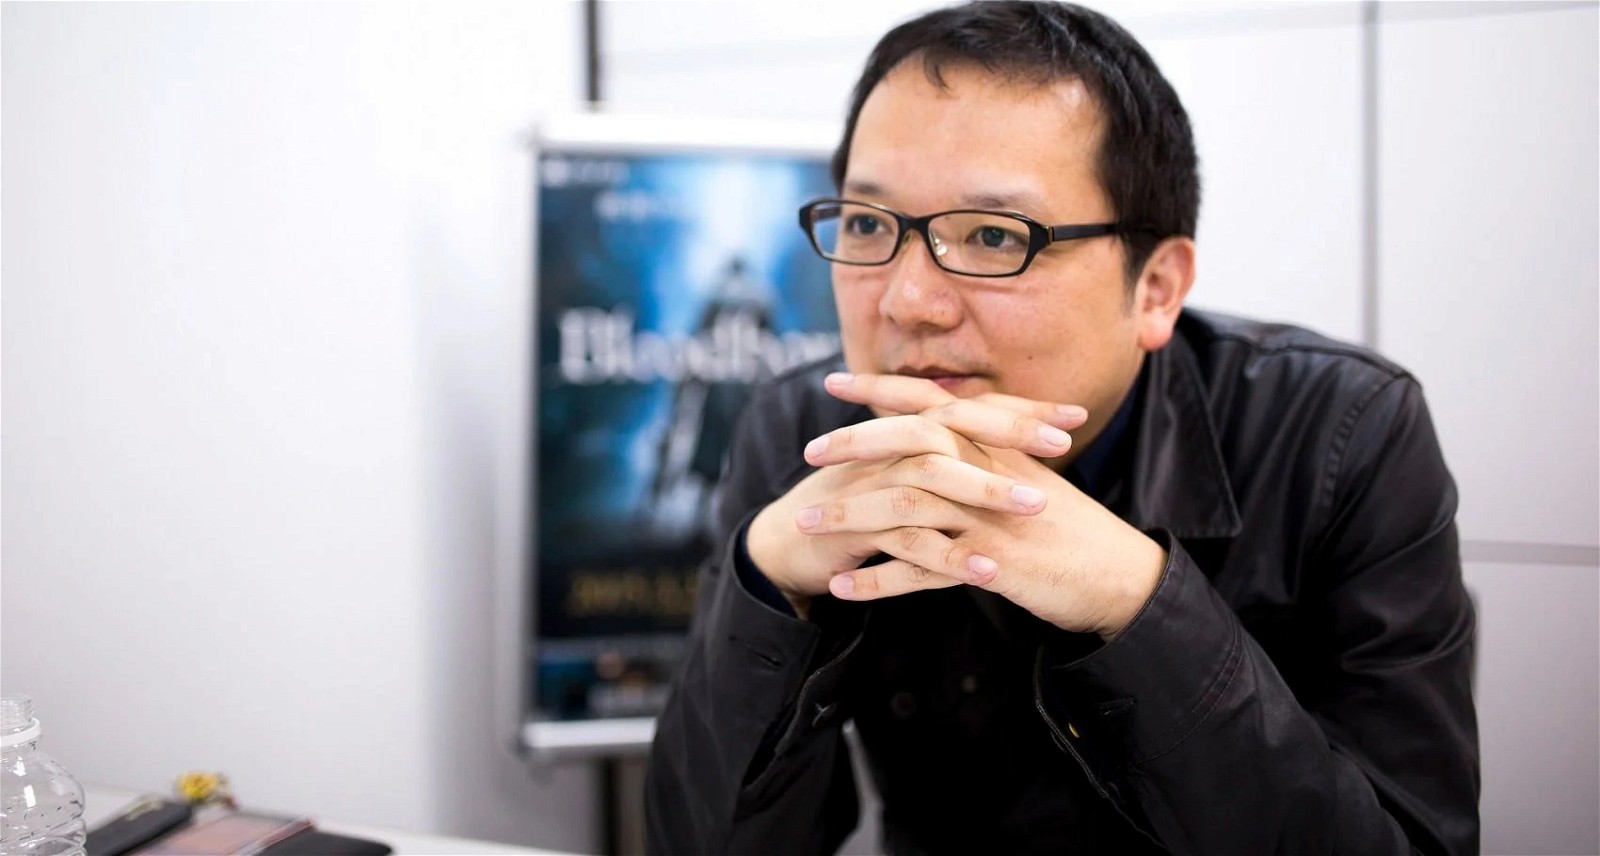 Hidetaka Miyazaki believes that happiness is a rare sight in the real world as well (credit: The New Yorker)